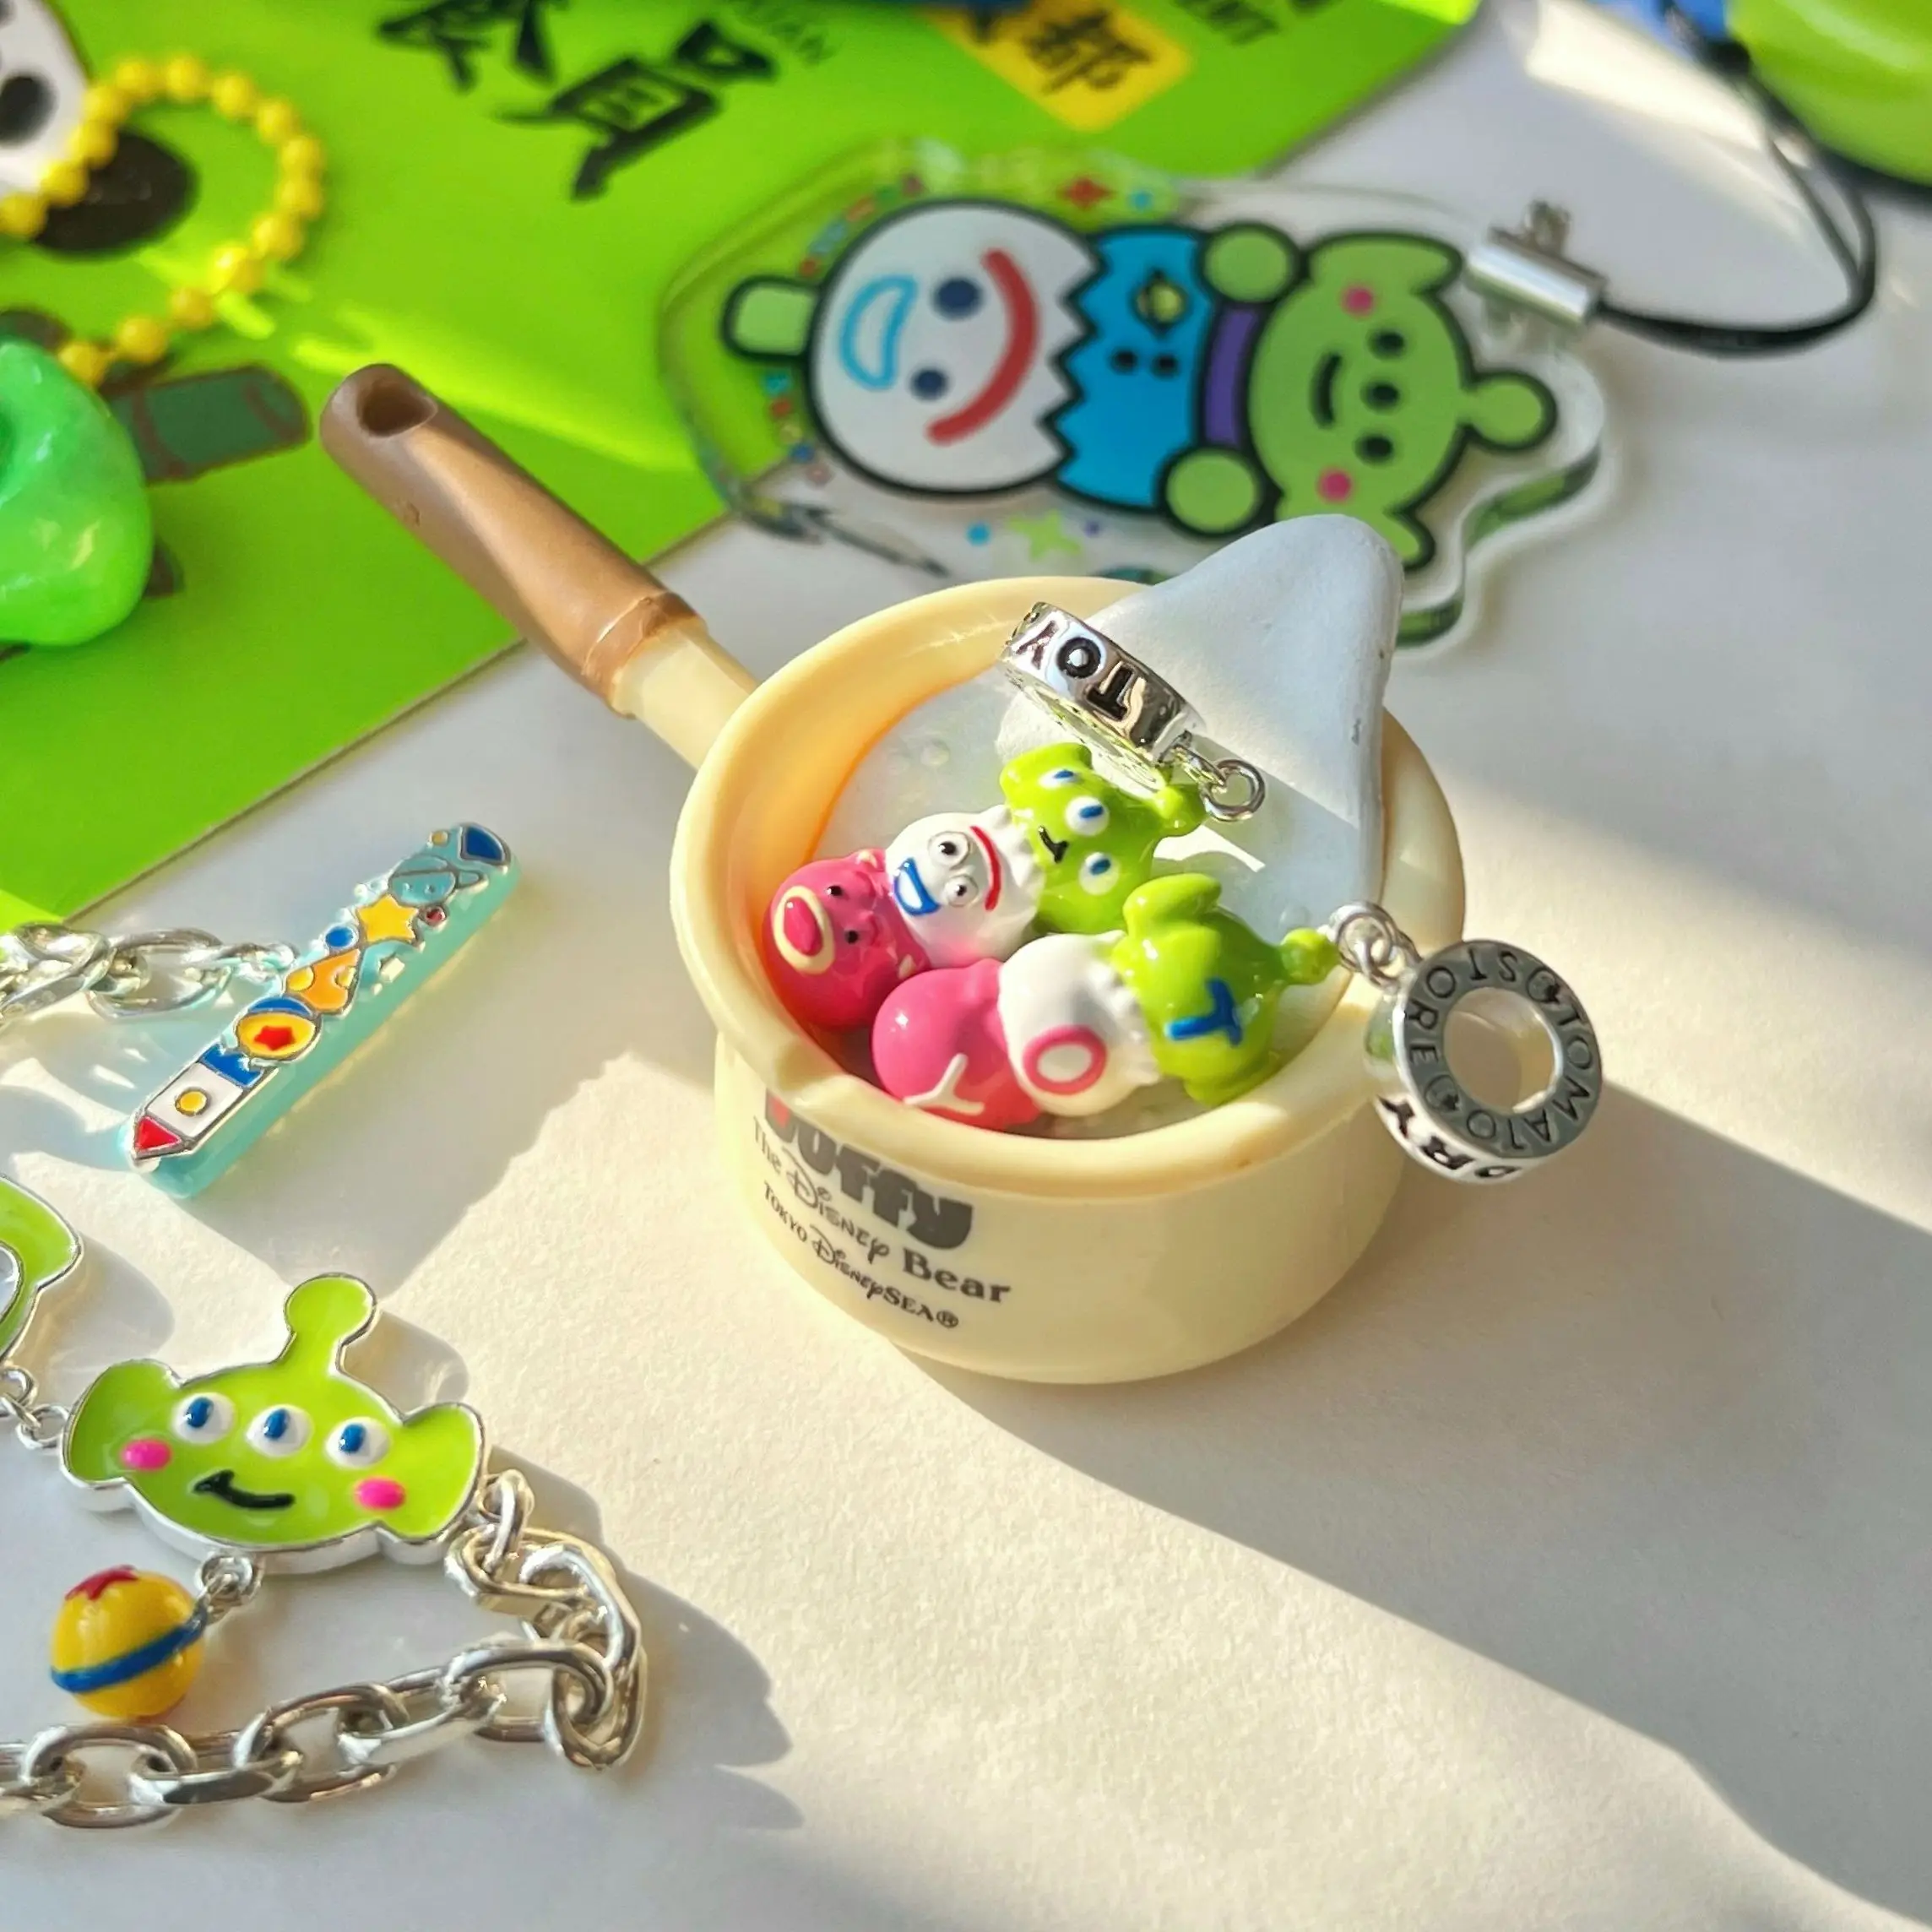 925 Sterling Silver Anime Toys Cartoon Dolls Charm Bead Fit Pandora Bracelet Bangle European Jewelry Fans Collection Women Gifts